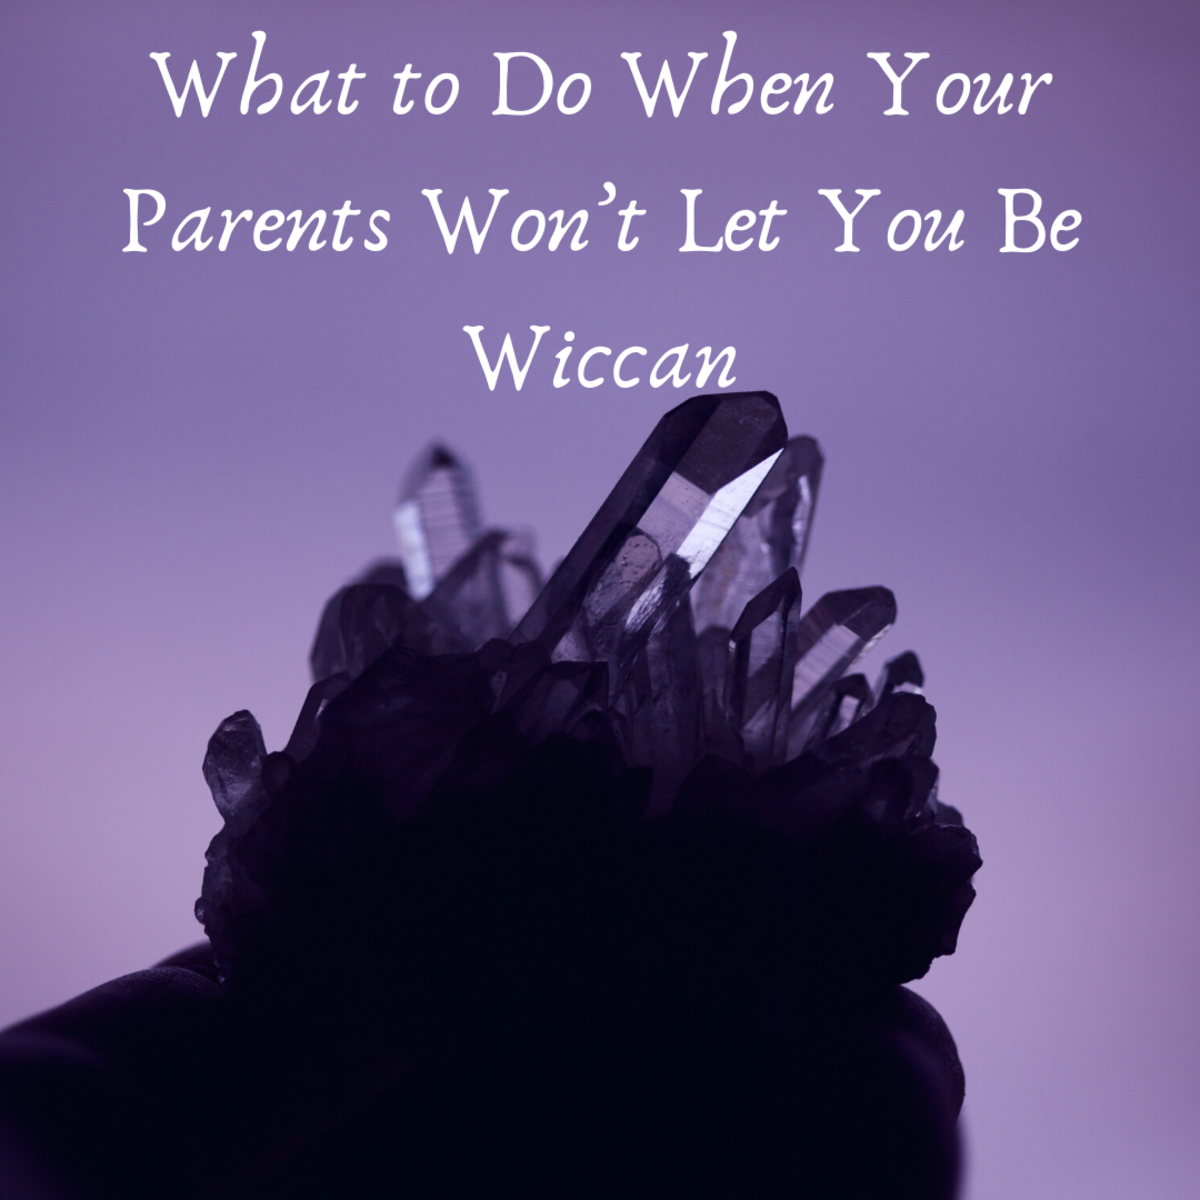 Read on to learn what you can do when your parents won’t let you be Wiccan.